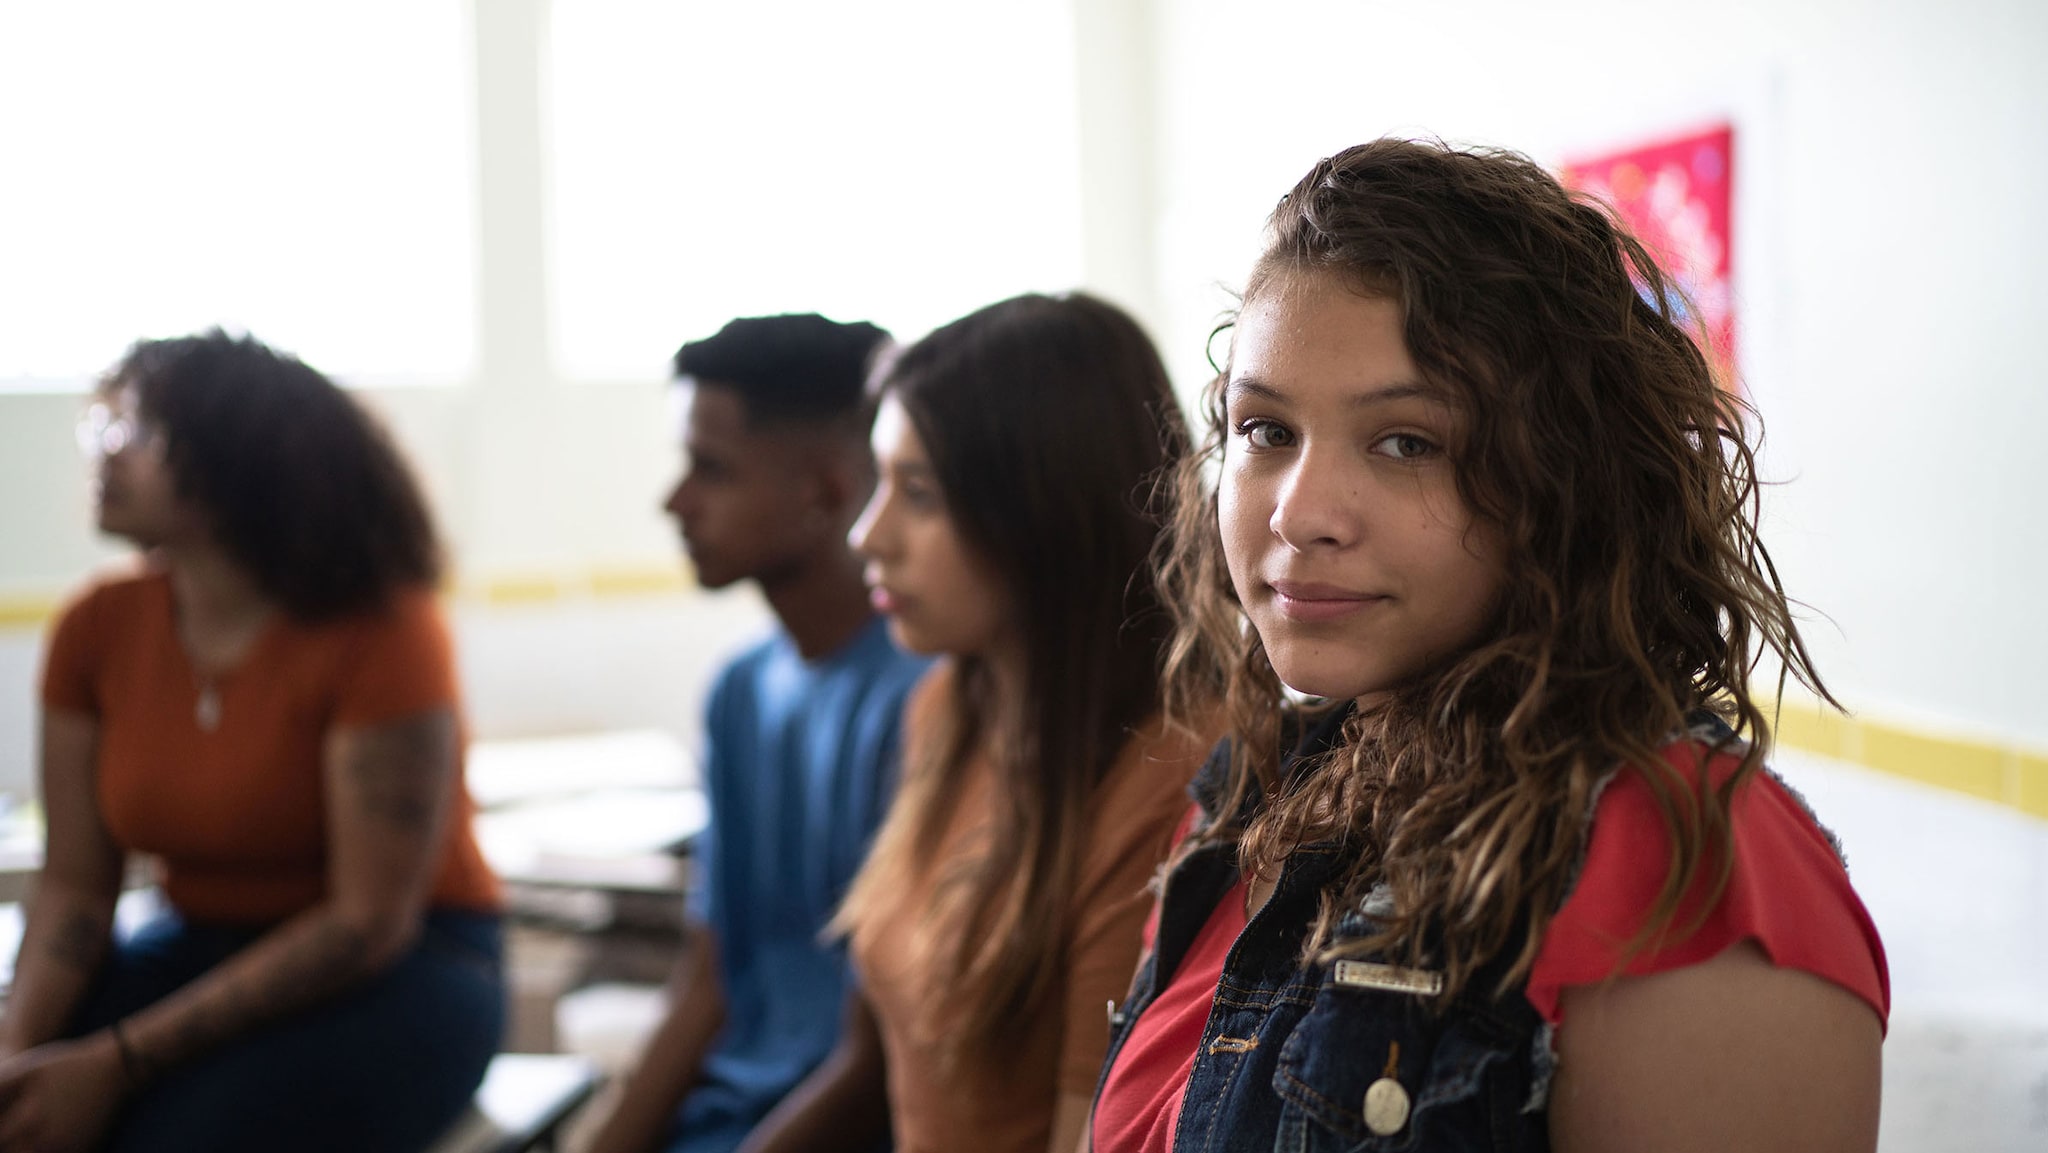 Portrait of a female teenage student in classroom, with a group of diverse students beside her.